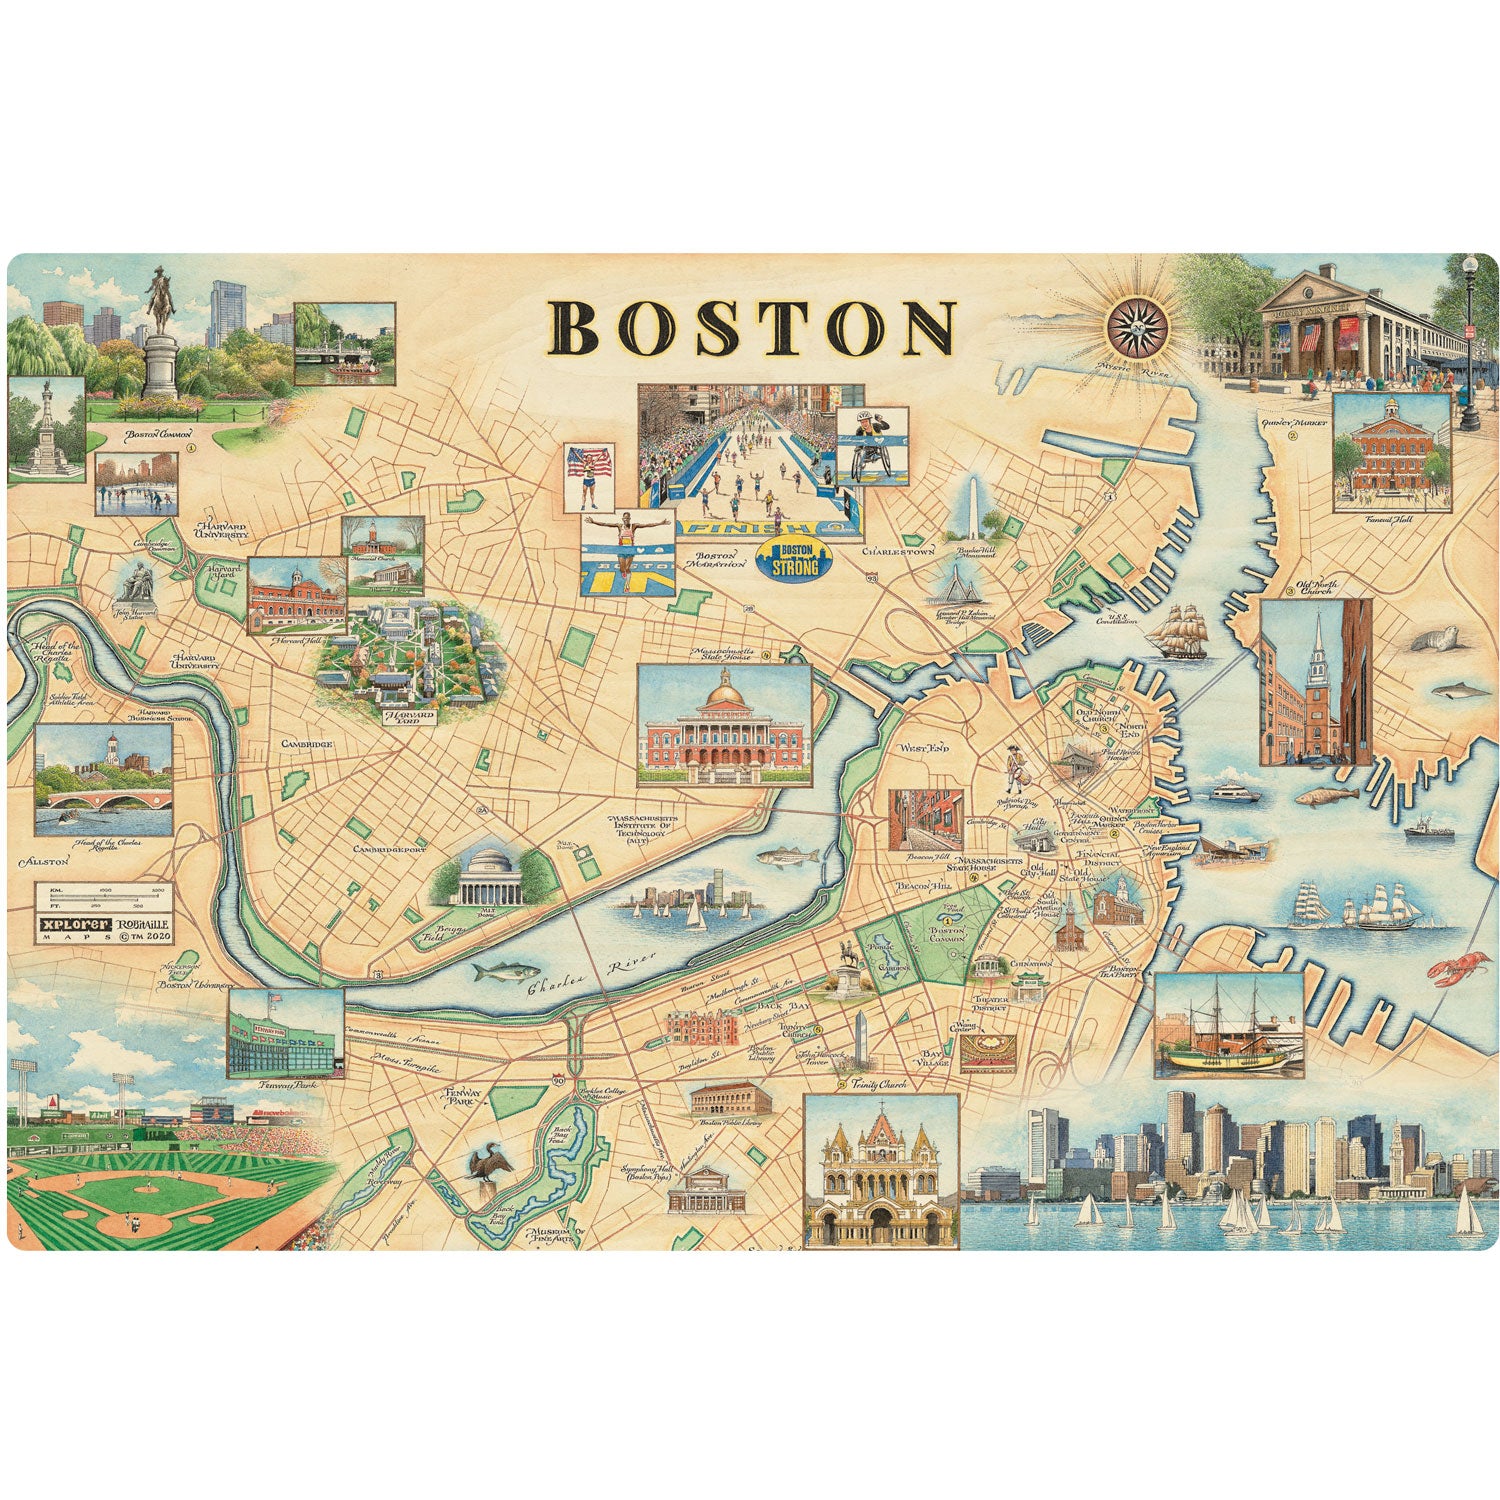 Boston city Map wood sign in Earth Tone colors. Featuring Boston strong, Boston Marathon, Fenway Park, Museum of Fine Arts, Massachusetts State House, Bunker Hill Monument.